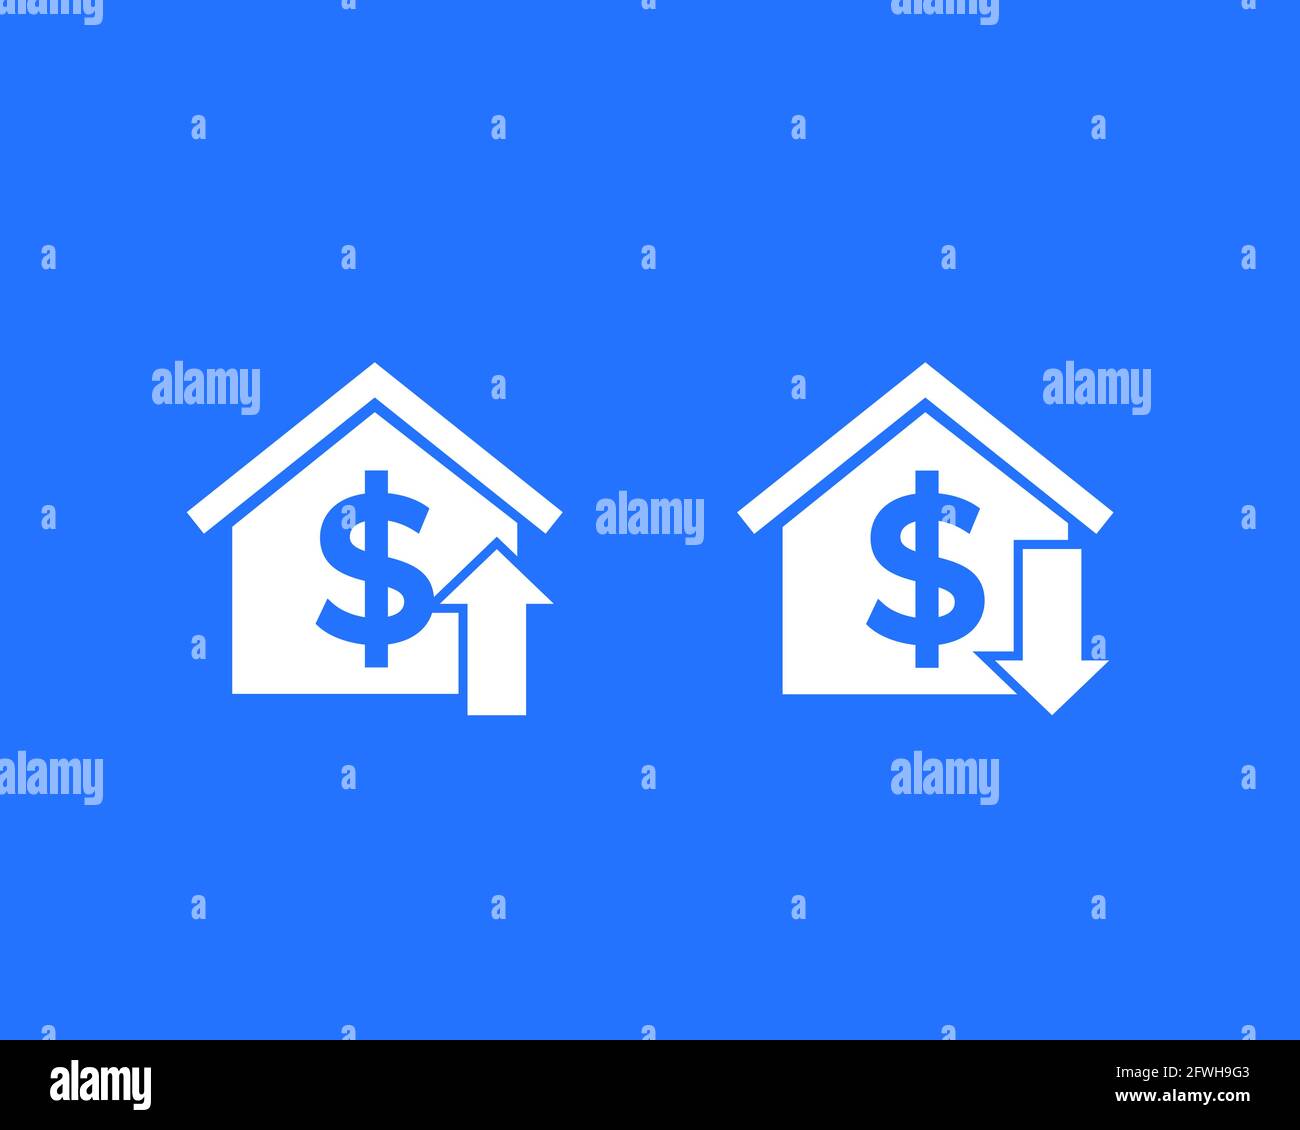 house prices growth and decline icons Stock Vector